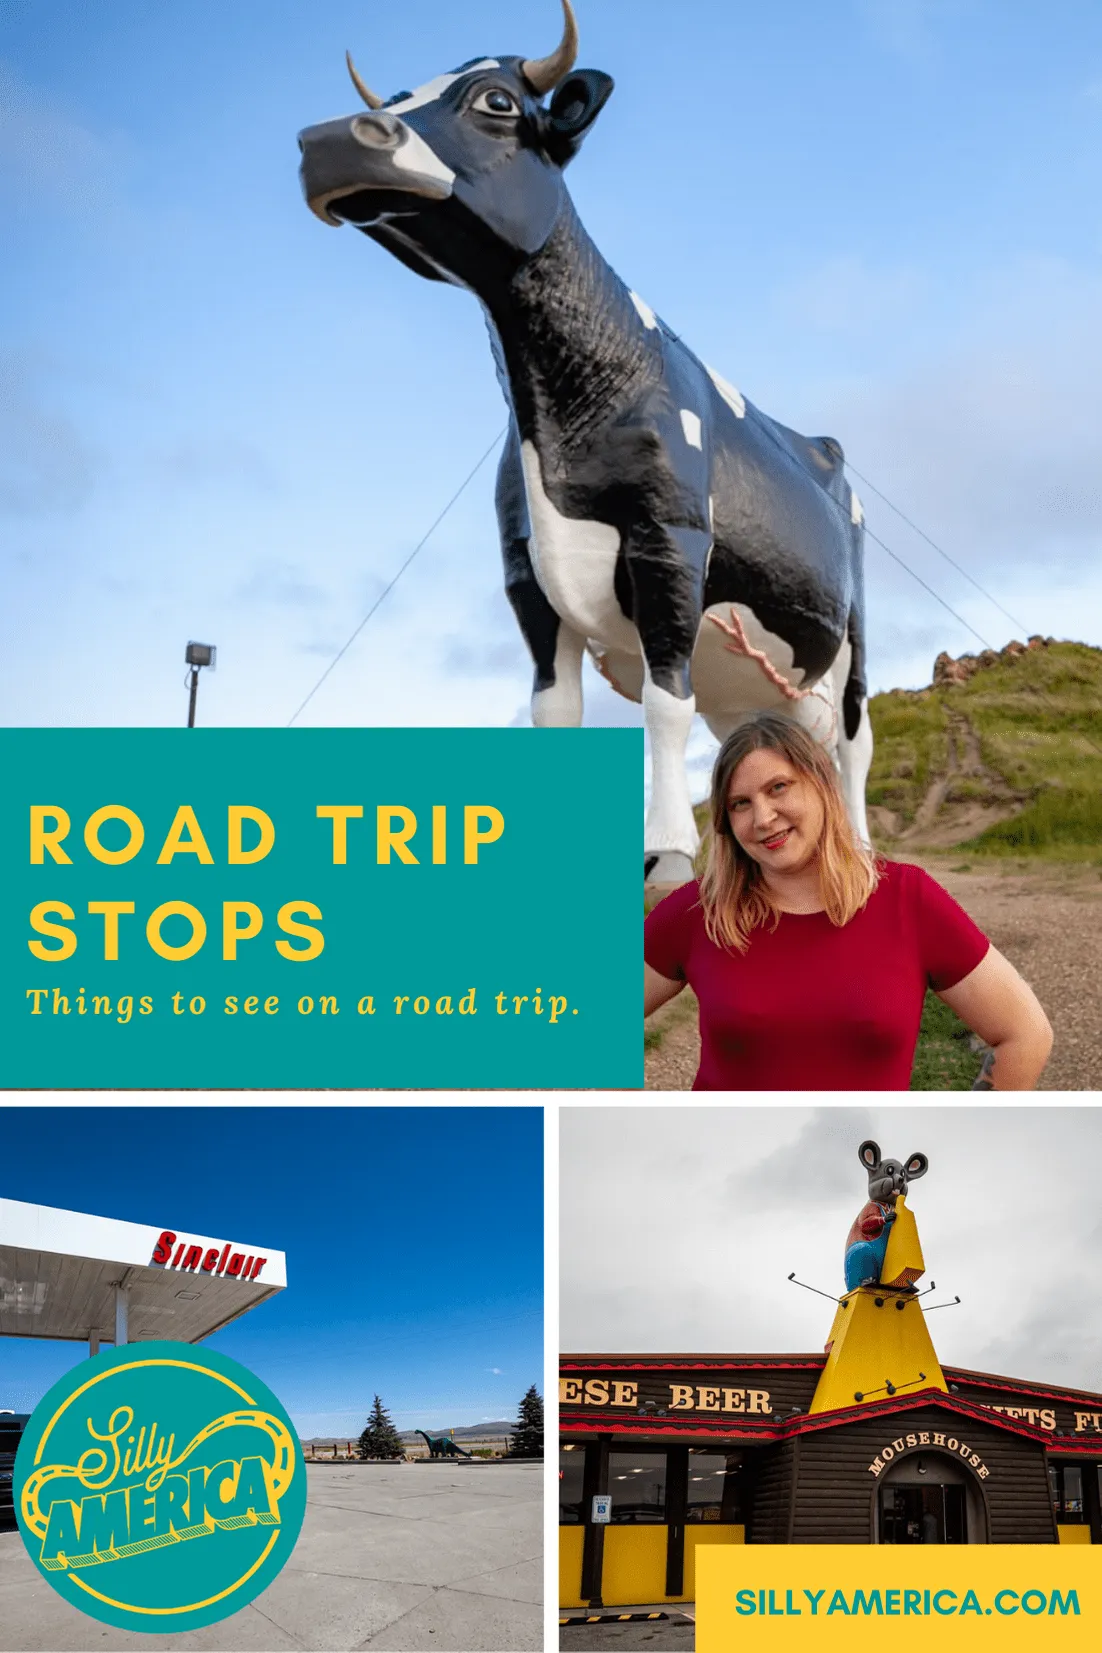 You might think of a road trip as being a way to get from point A to point B. But a road trip is all about all the things you see in between. Roadside attractions, national parks, drive-throughs, and even gas stations are all road trip stops that are part of the car trip experience. In fact, there are so many things to see on a road trip that it sometimes might seem impossible to see them all!  #RoadTrip #RoadTrips #RoadTripPlanning #RoadTripPlanningTips #RoadTripPlanningIdeas